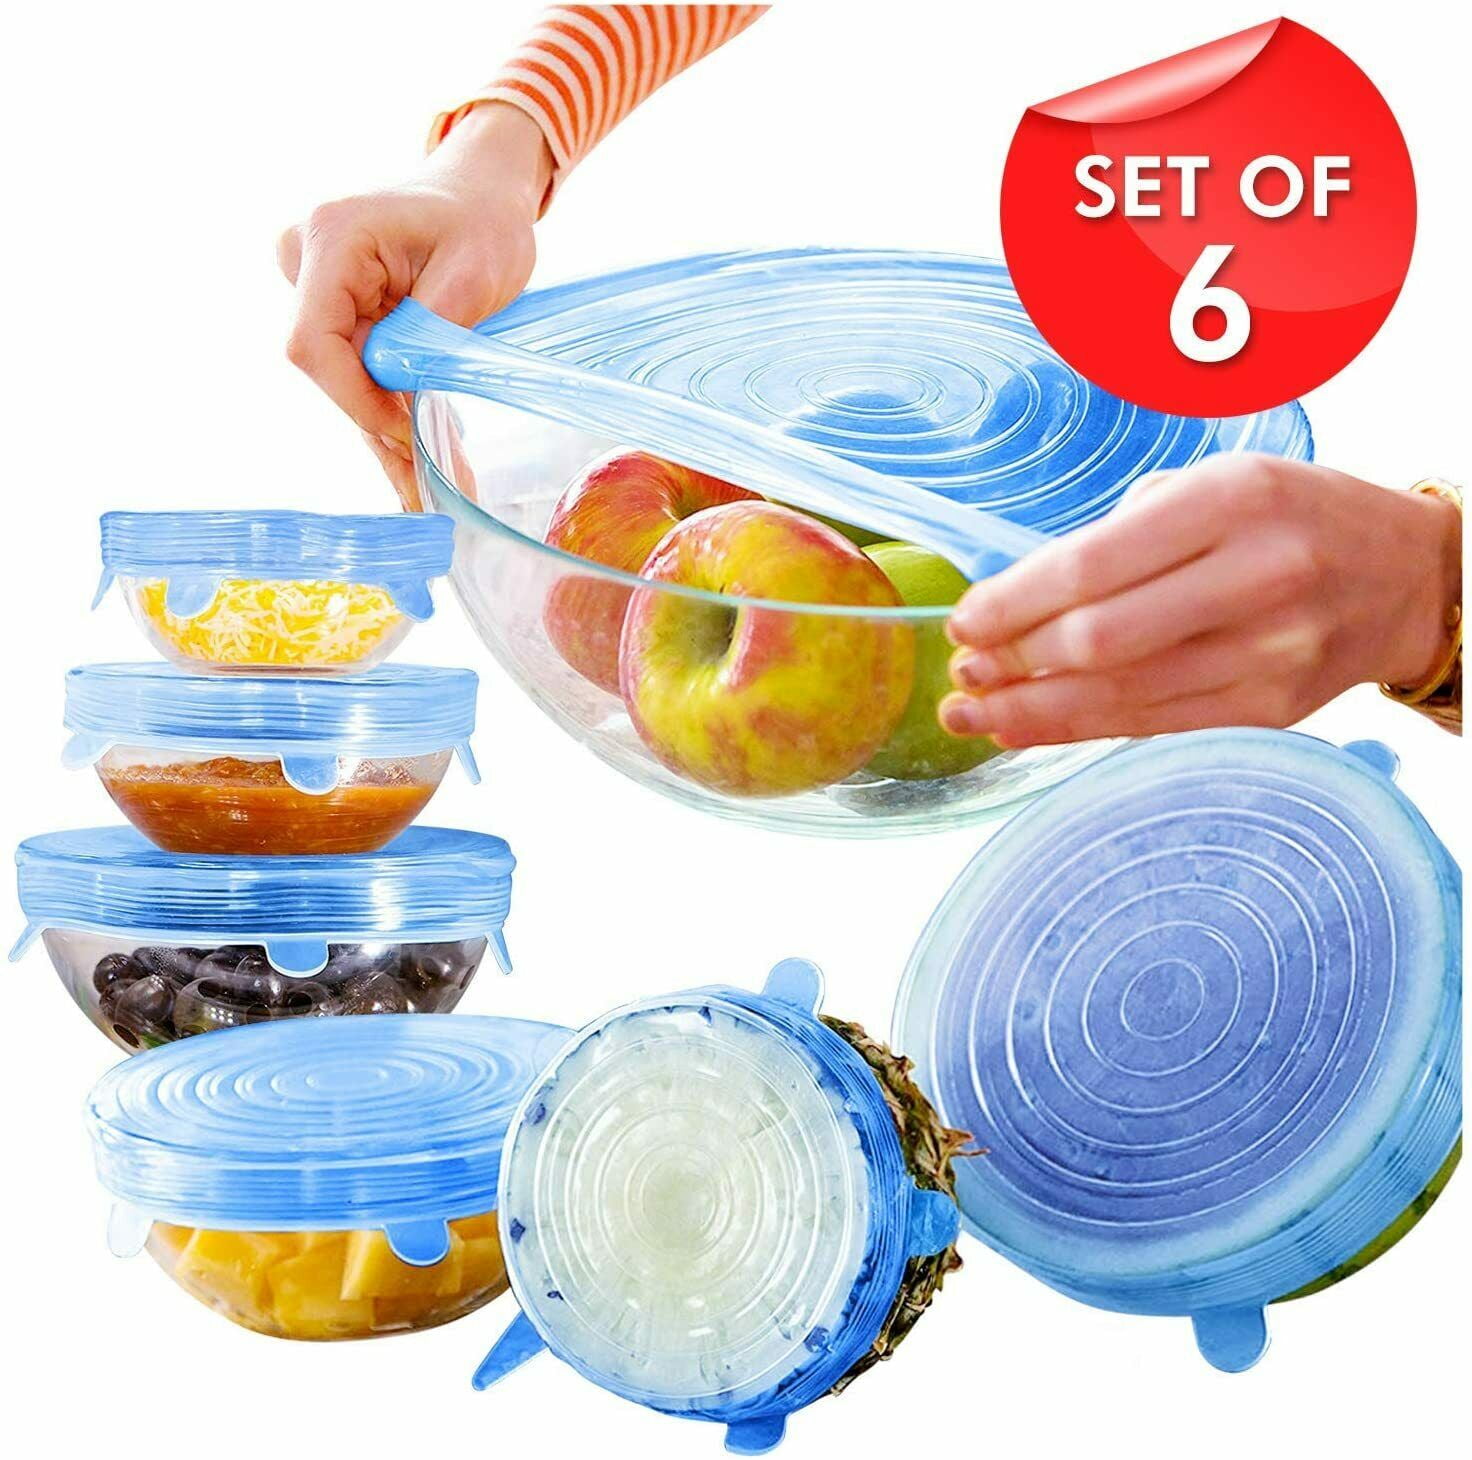 FZFLZDH 6pcs Silicone Stretch Food Covers, Platinum Food Grade Silicone,  BPA-Free, Flexible, Reusable, Durable & Expandable, Eco-Friendly Bowl Lids,  White 